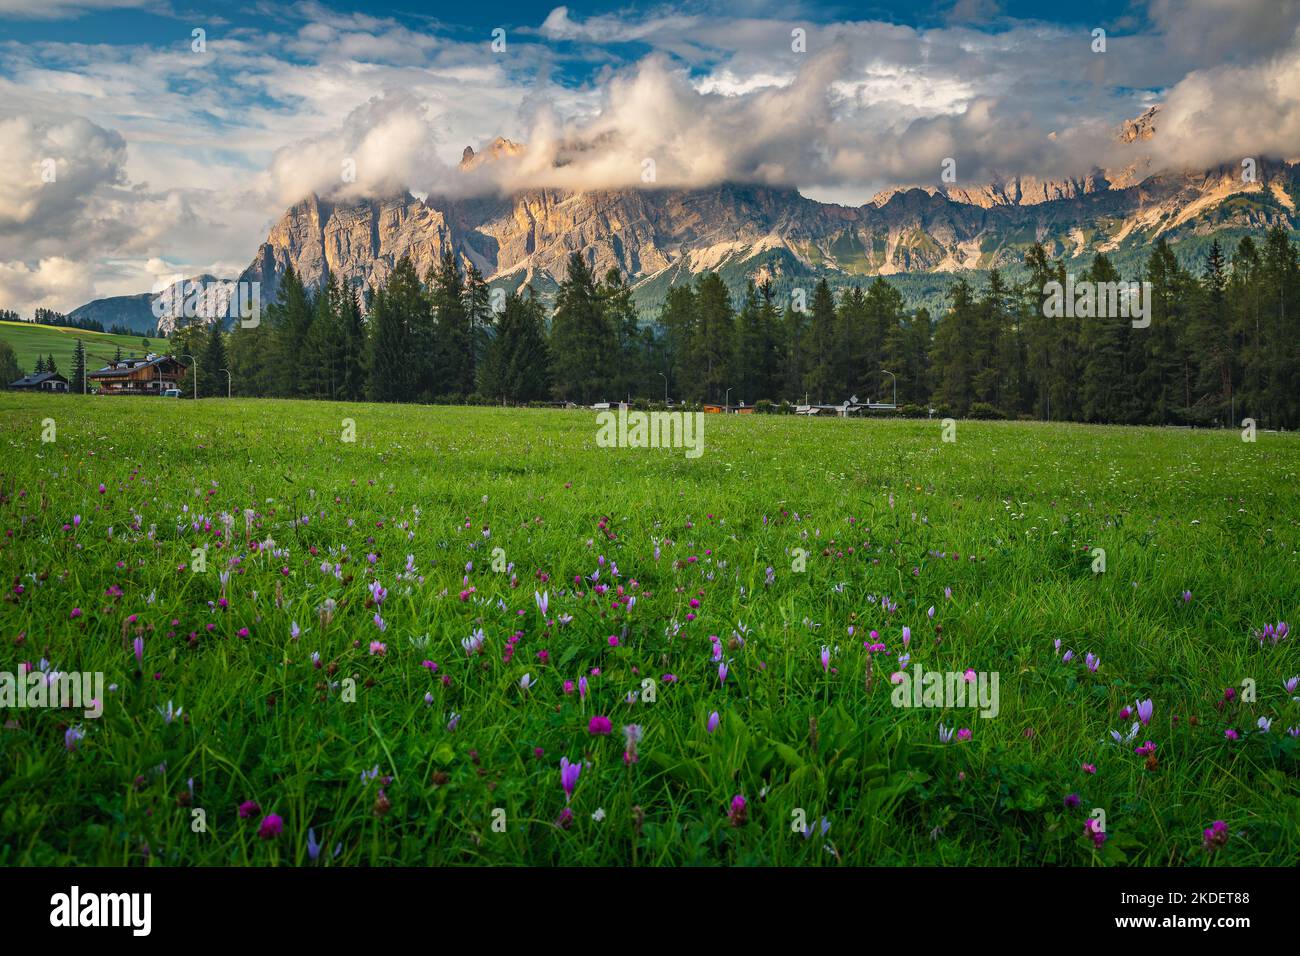 Stunning flowery green fields with blooming purple colchicum flowers and beautiful high mountains in background at sunset, Dolomites, Italy, Europe Stock Photo